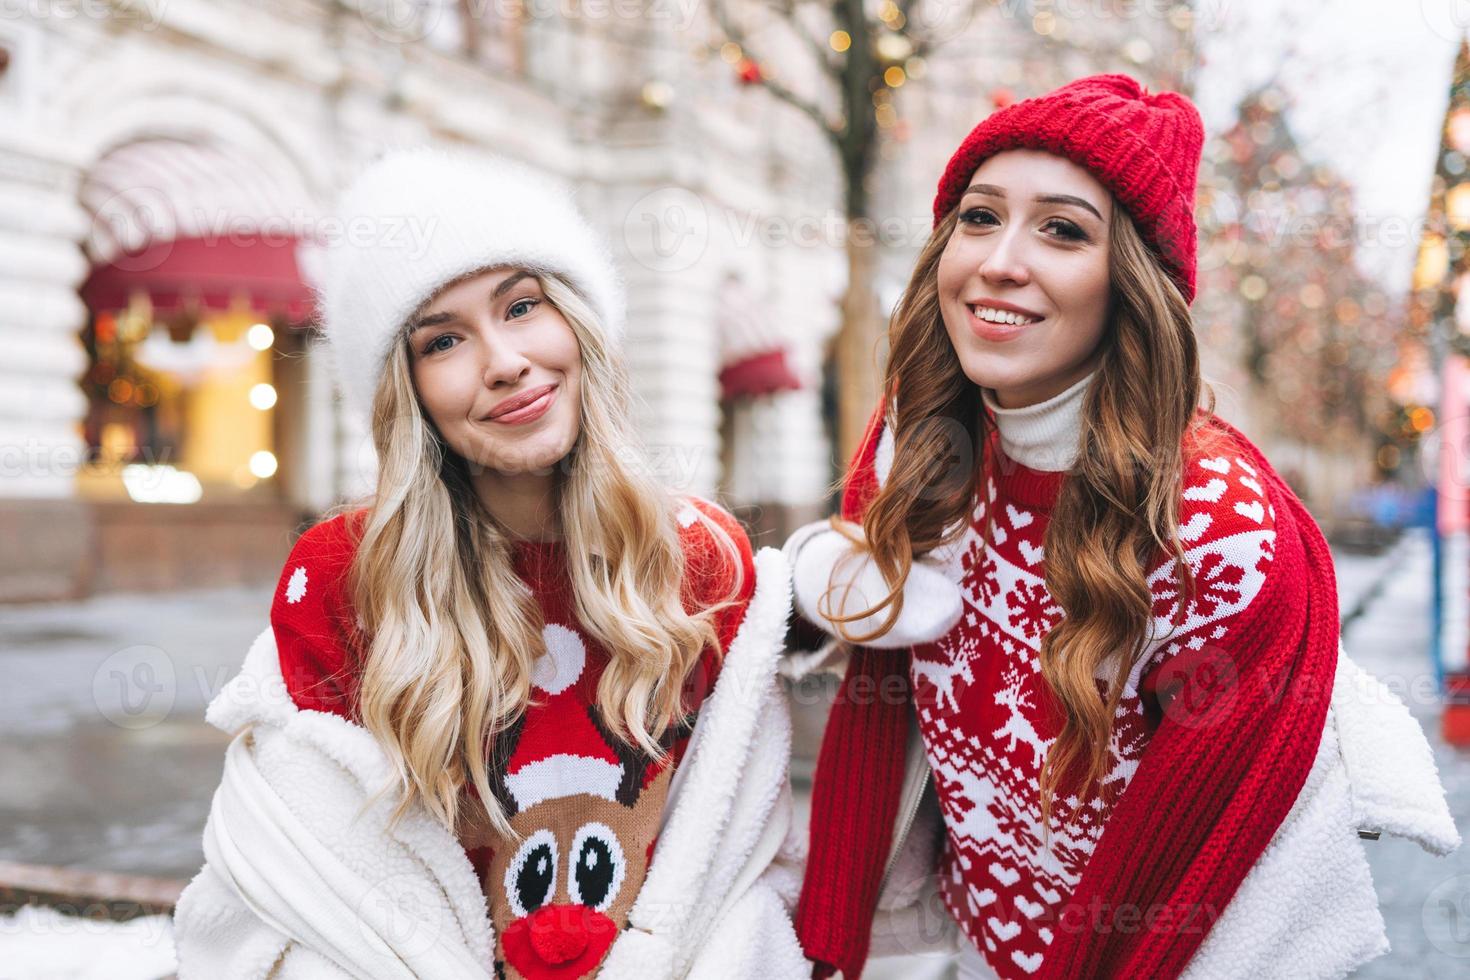 Young happy women friends with curly hair in red having fun in the winter street decorated with lights photo